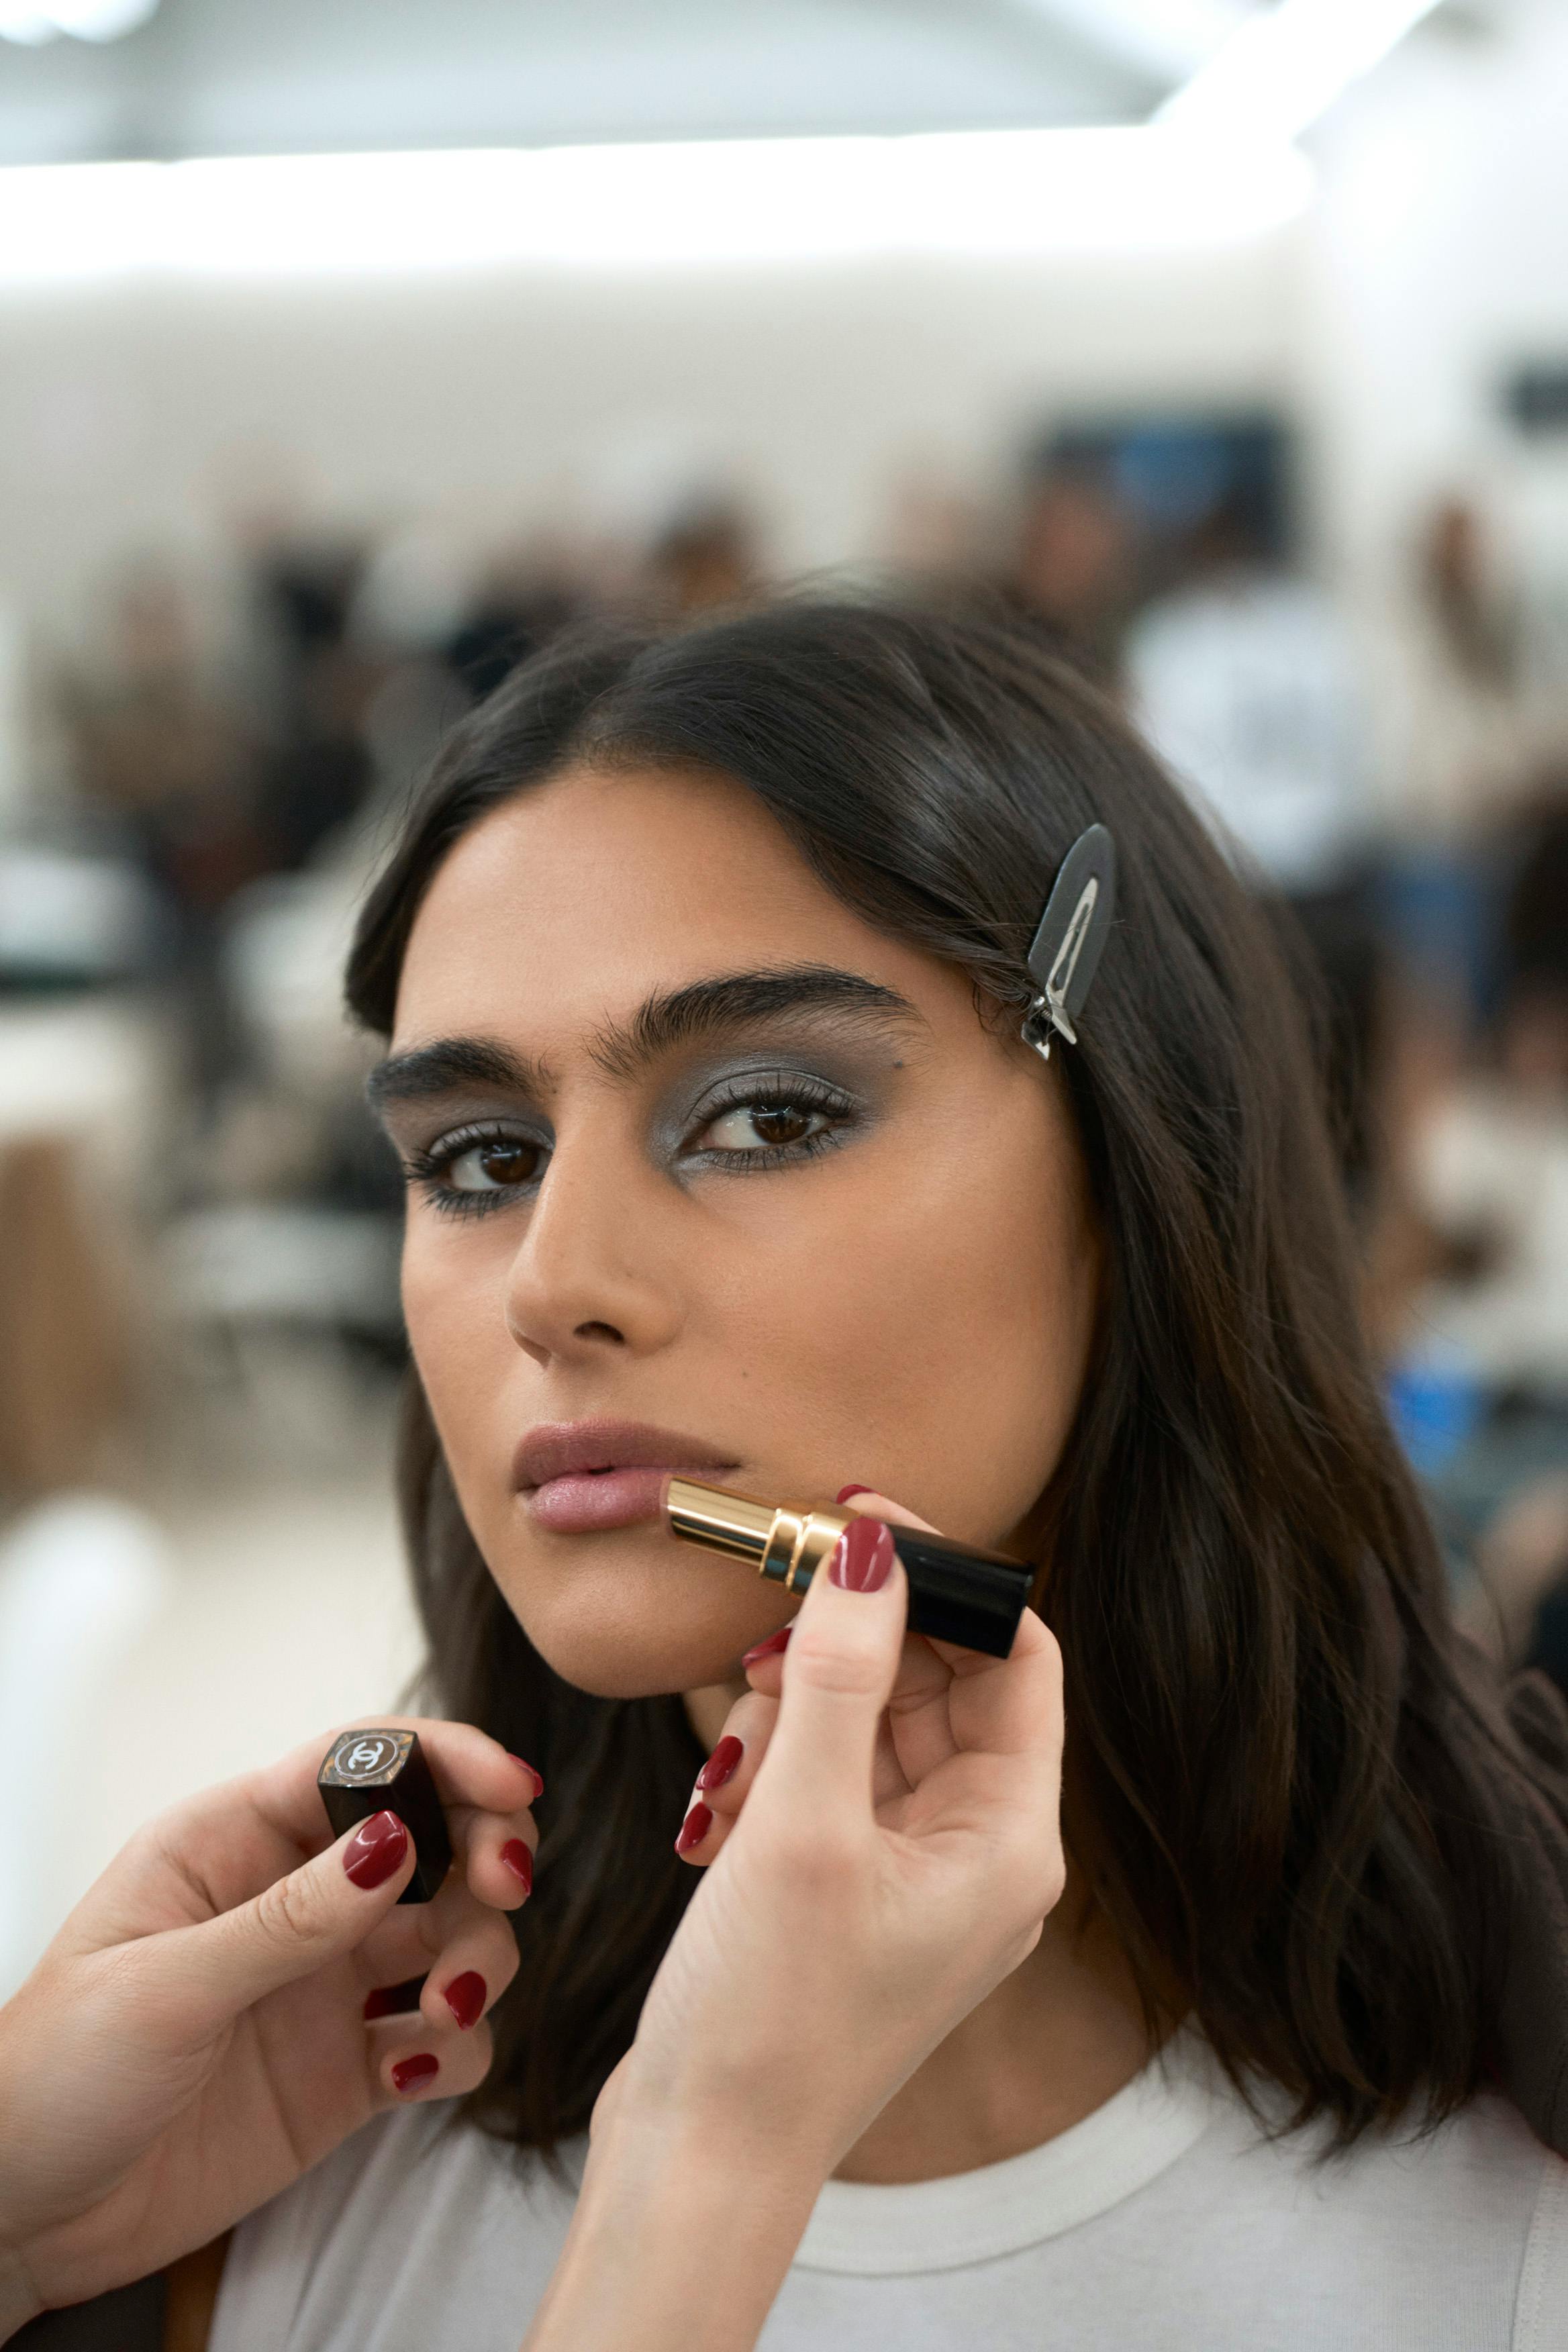 Chanel calls this make-up the most fashionable of the new season